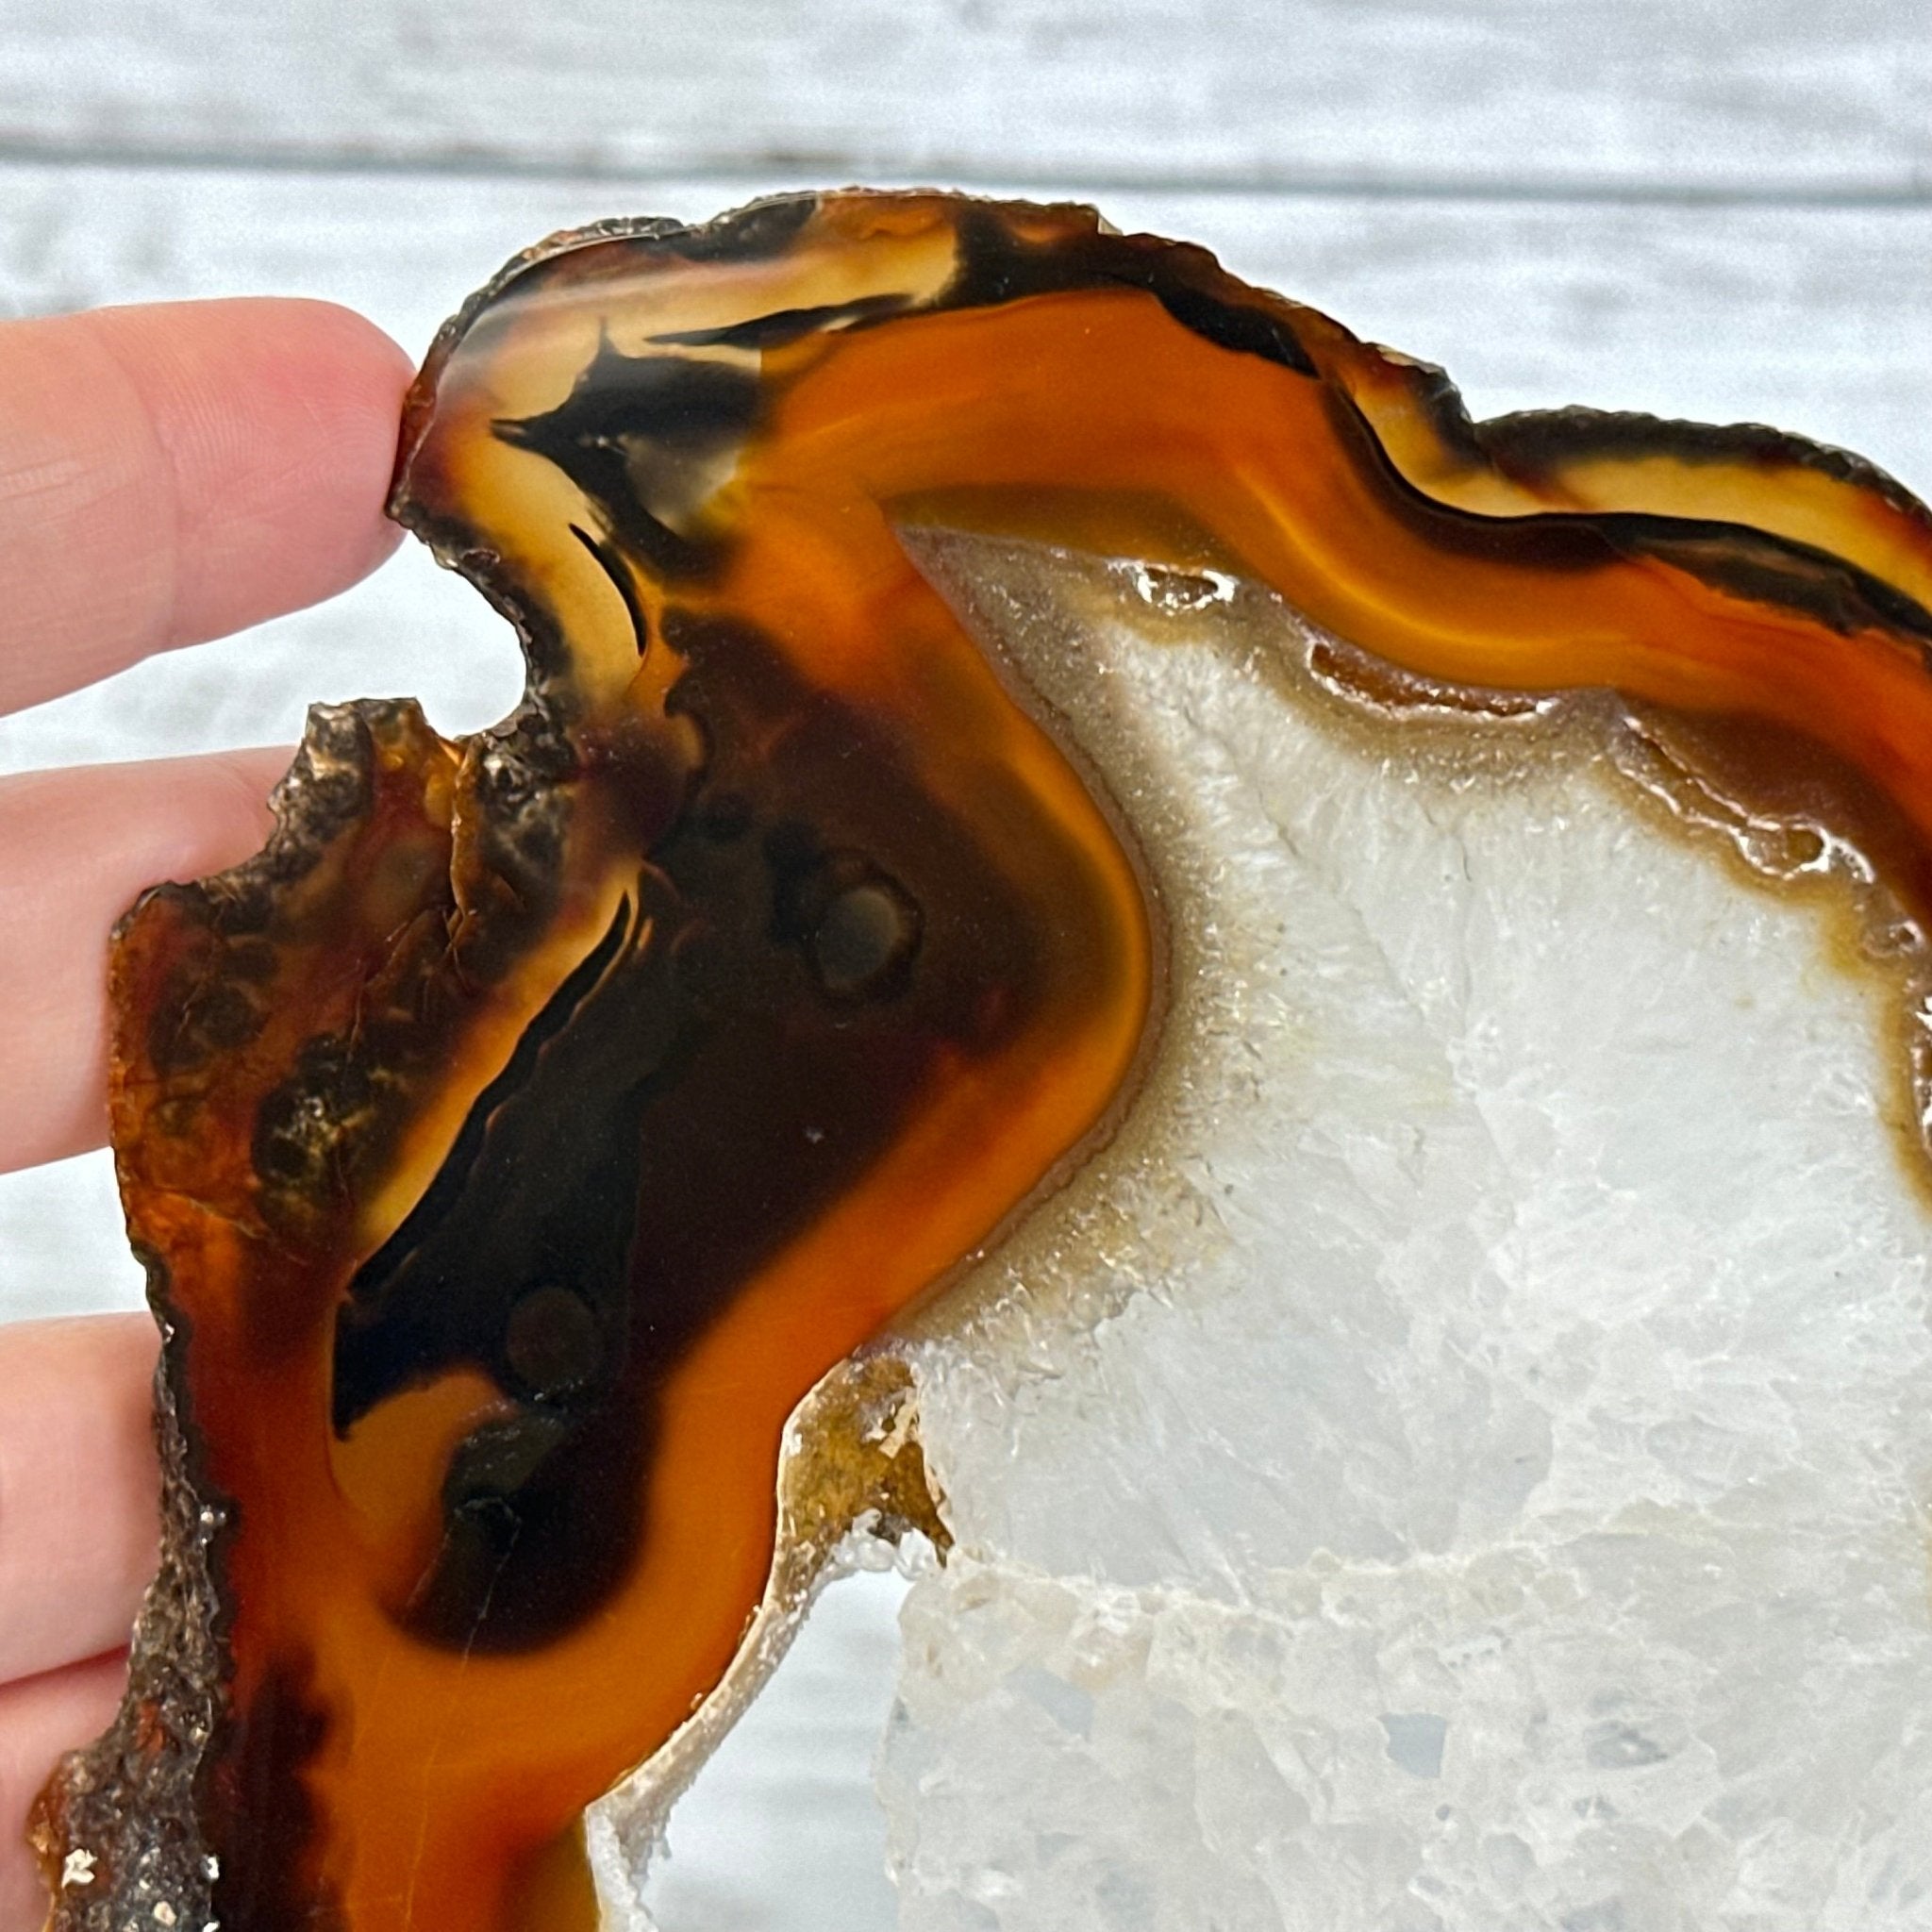 Natural Brazilian Agate "Butterfly Wings", 15" Tall #5050NA-083 - Brazil GemsBrazil GemsNatural Brazilian Agate "Butterfly Wings", 15" Tall #5050NA-083Agate Butterfly Wings5050NA-083